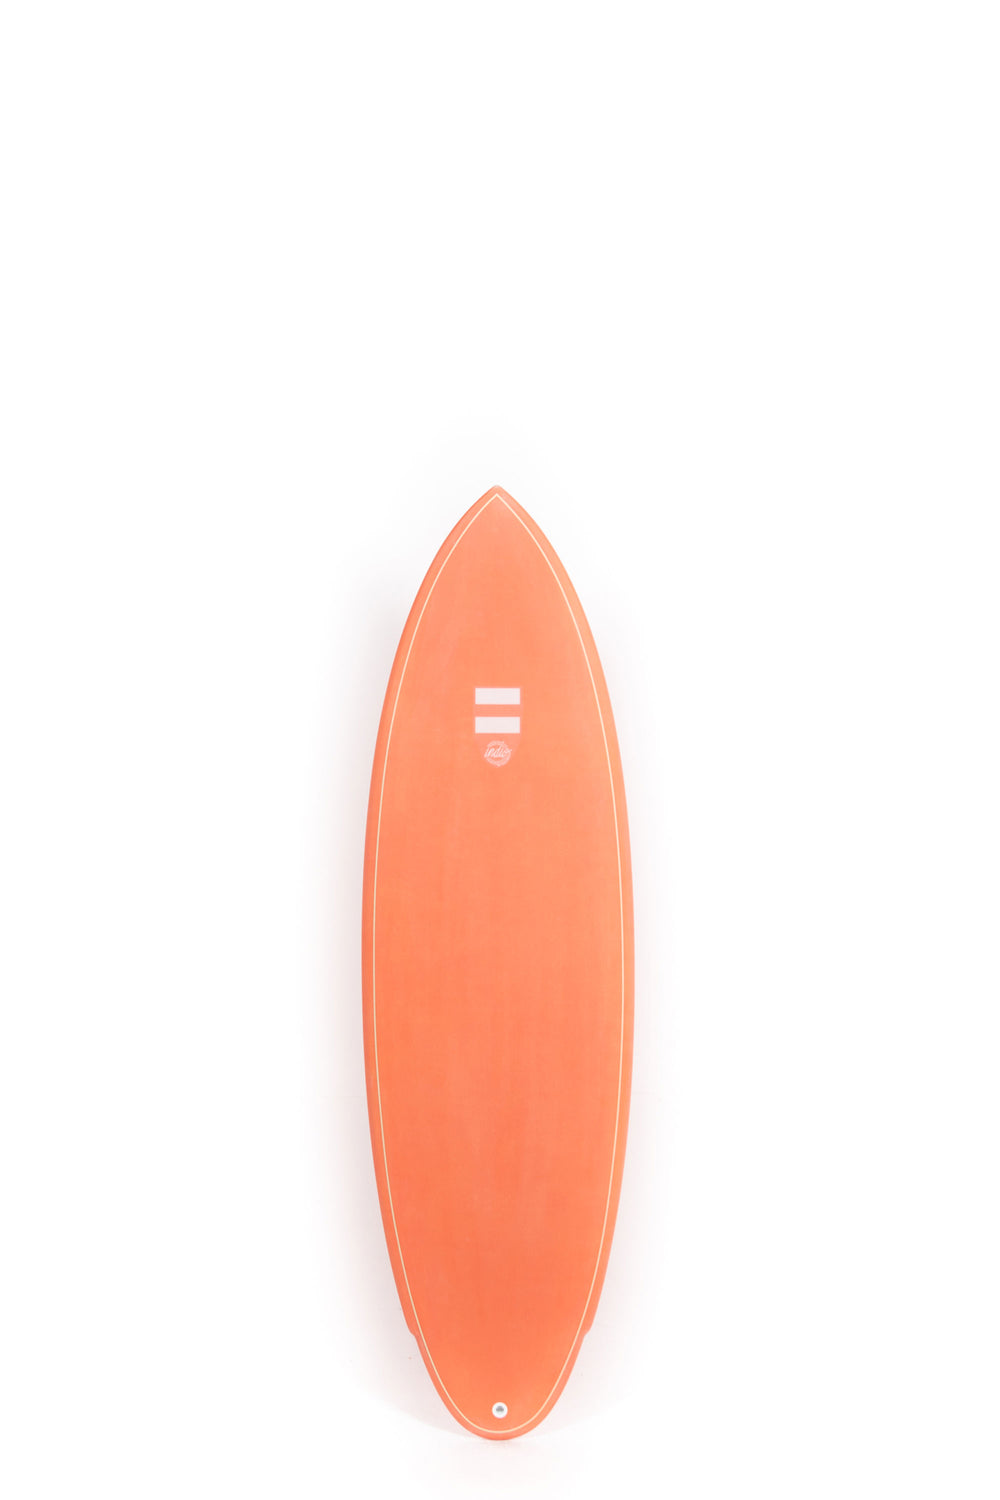 Pukas Surf Shop Indio Surfboards Rancho Red Fall 6'0